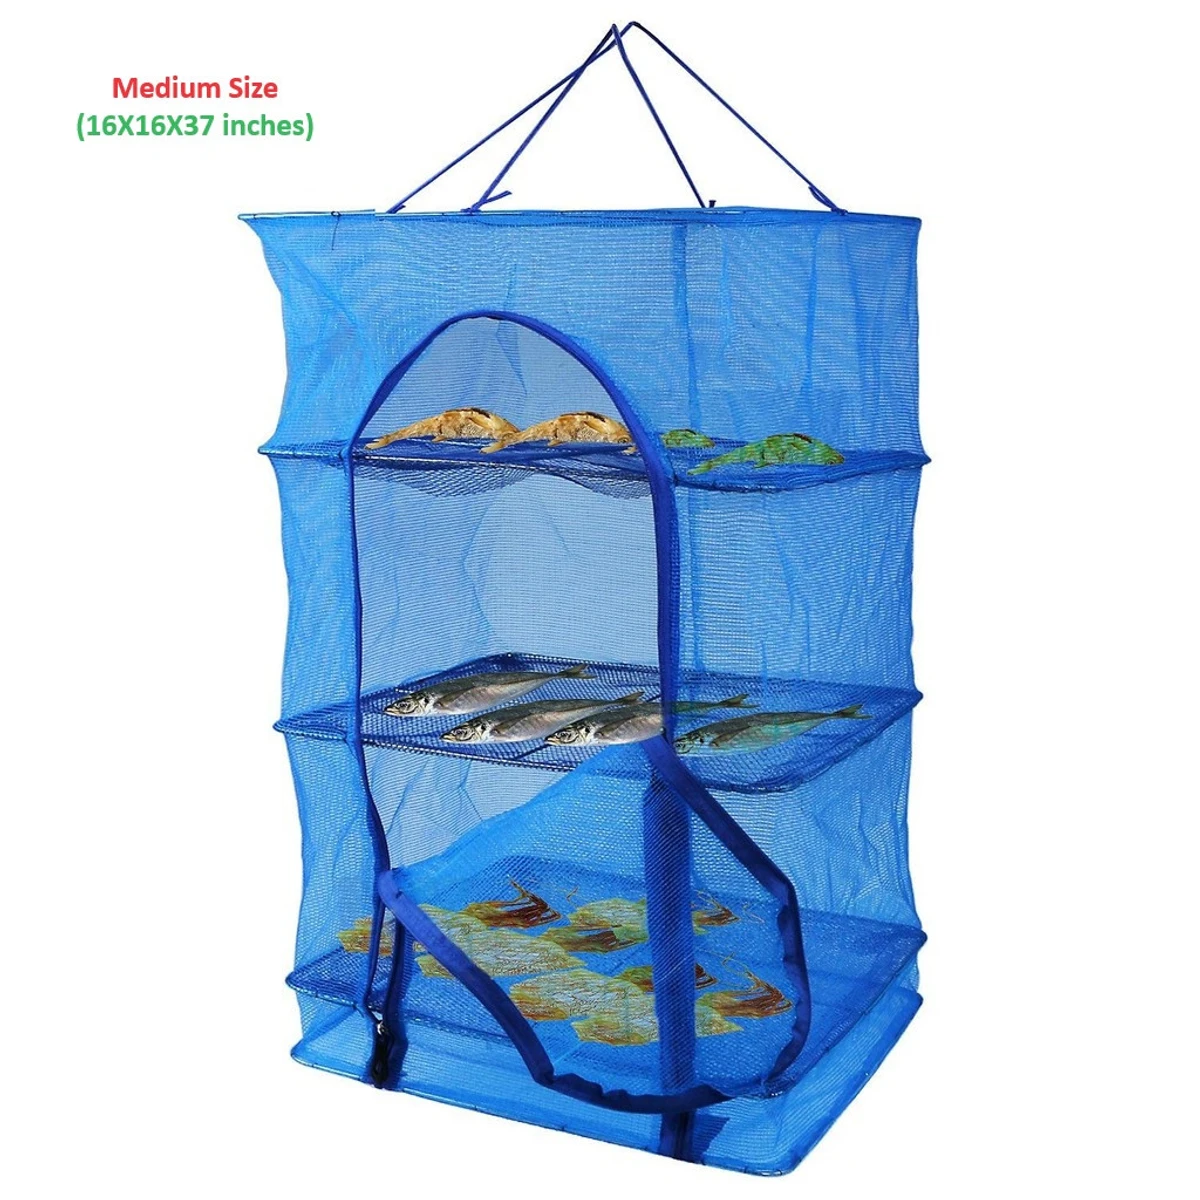 Foldable 4 layer Multifunctional Food Drying Case (Medium Size 16X16 inch's)